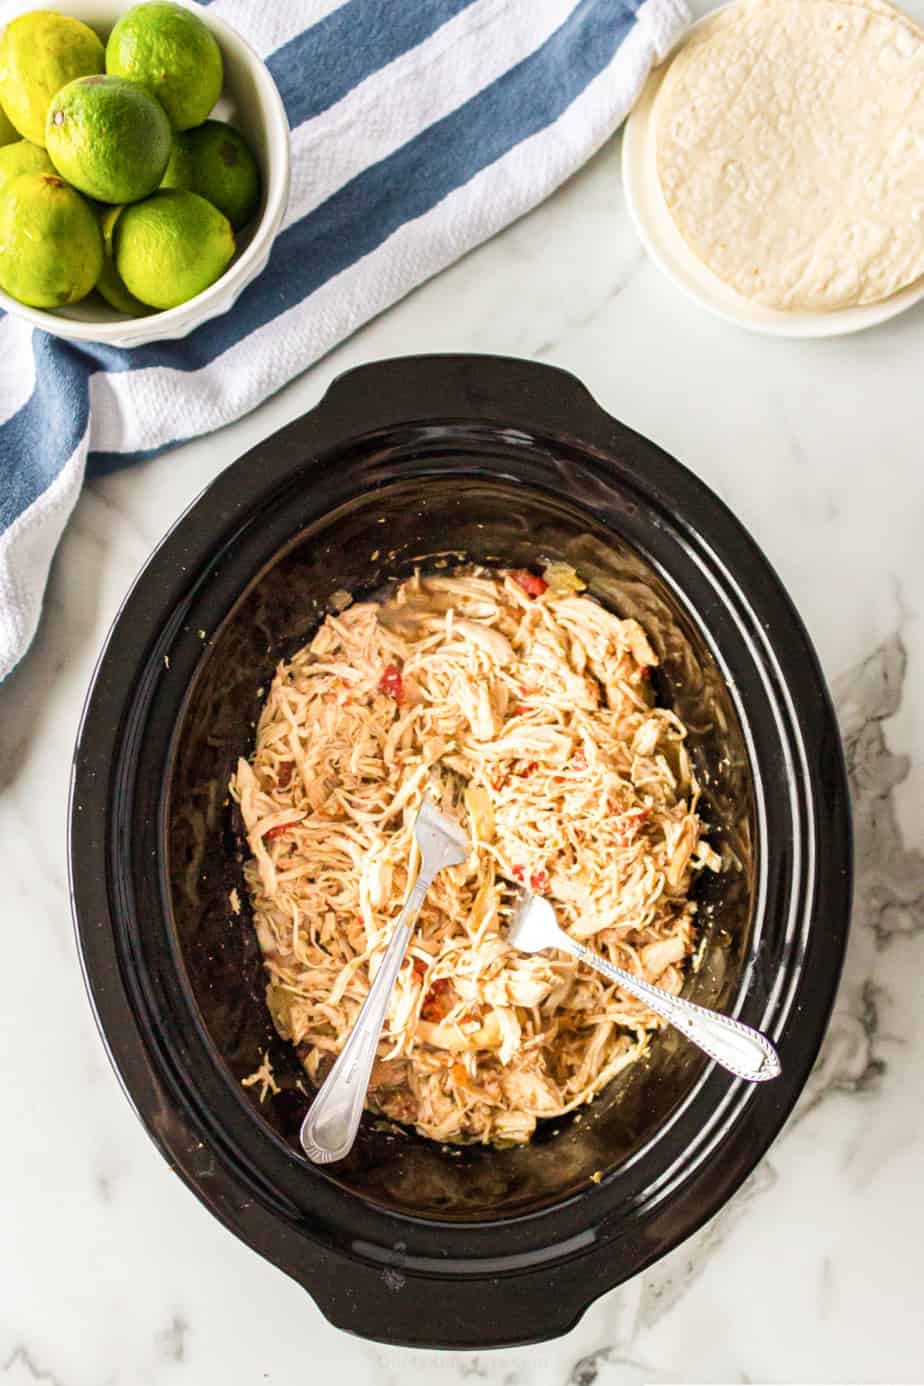 Chicken shredded in a crockpot from overhead with two forks.